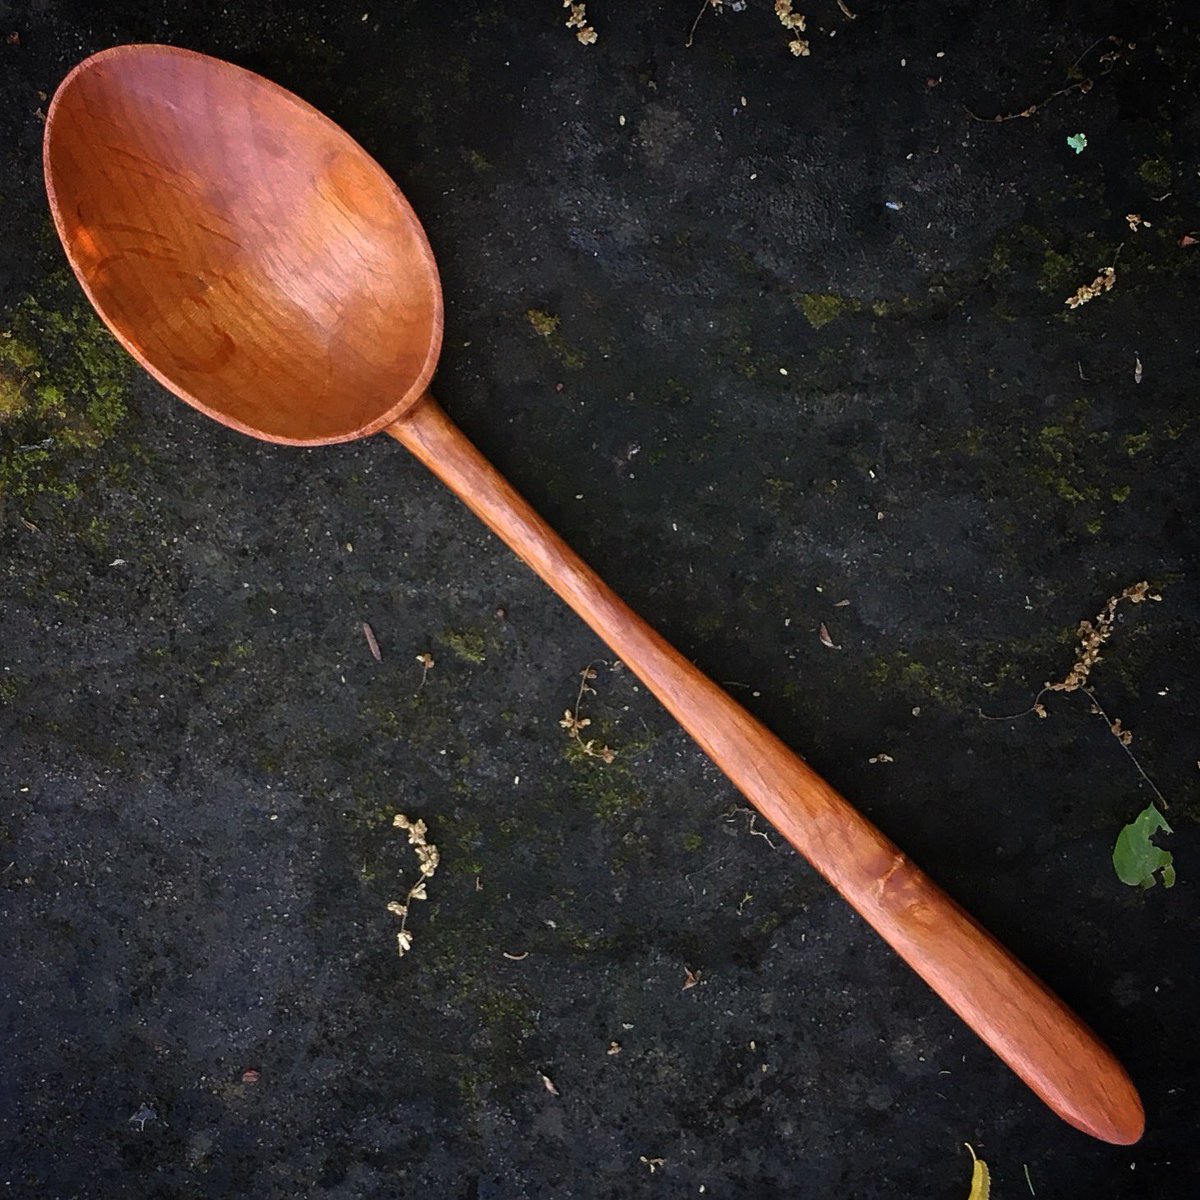 What if a wooden spoon could help AAPI’s? I’m making 10 spoons to auction in support of Twitter's #StandForAsians allyship fund (3x match). Let’s raise an obnoxious amount of 💰. ONLY 10 will be made. $250 ea. min. Top 10 DM donations get a spoon, auction ends in 1 week.